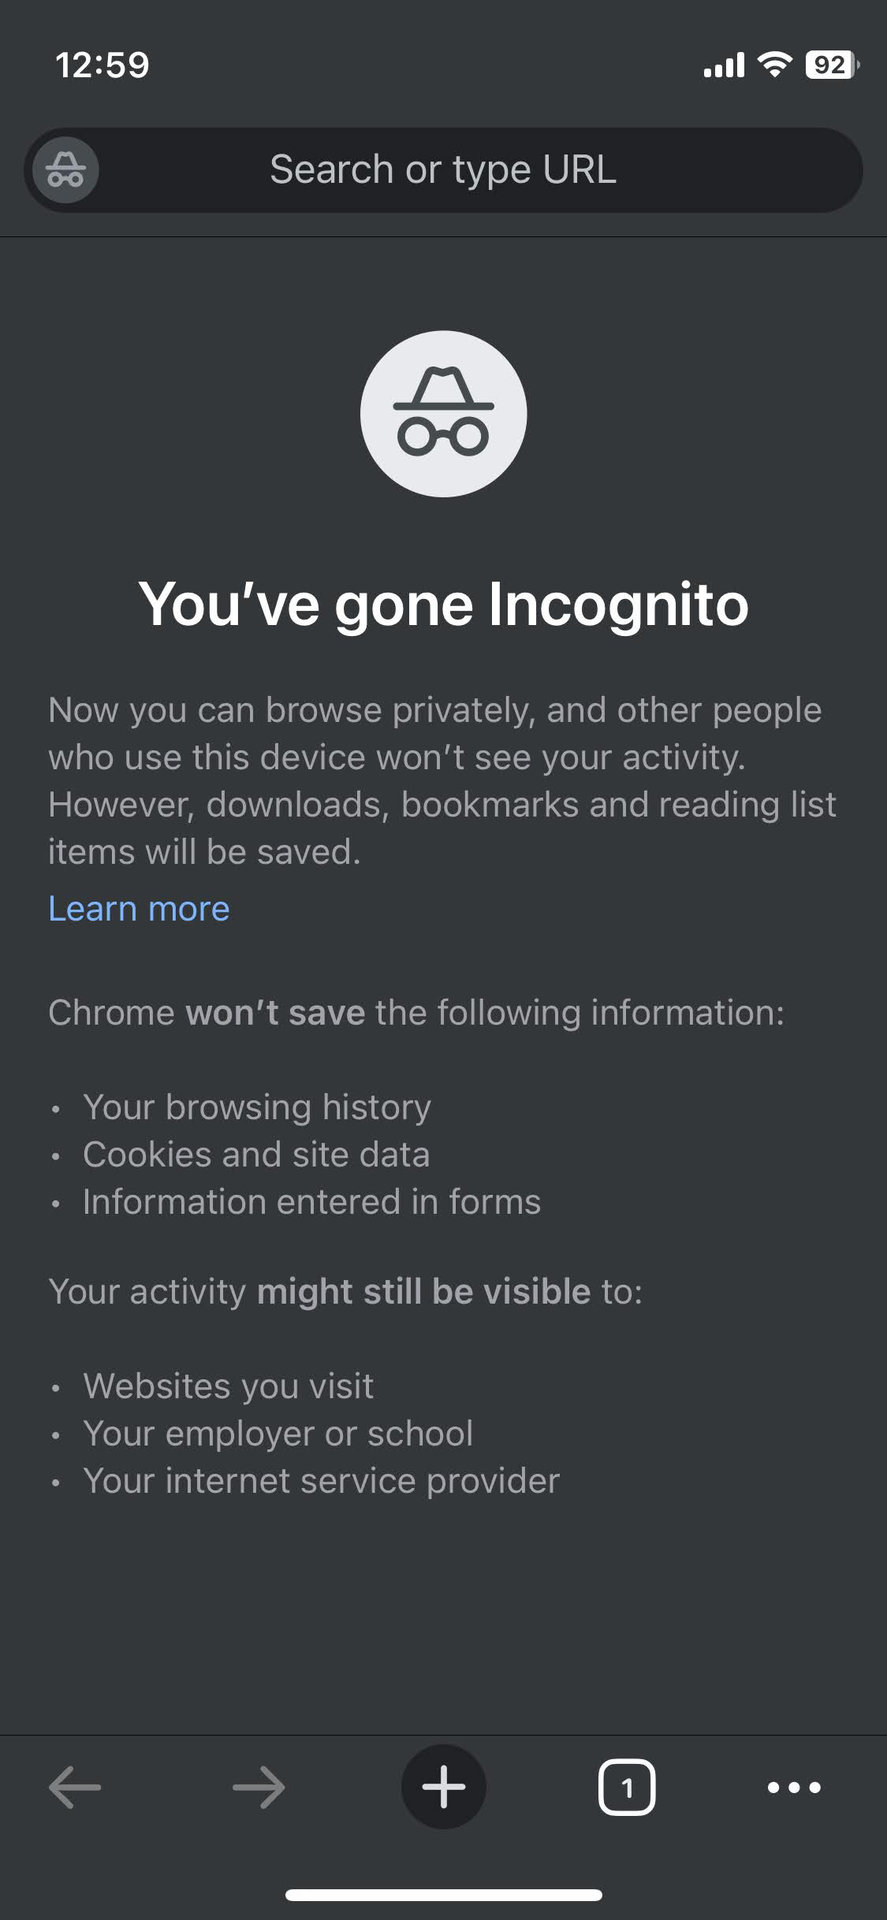 How to use incognito mode on Chrome for iPhone (3)